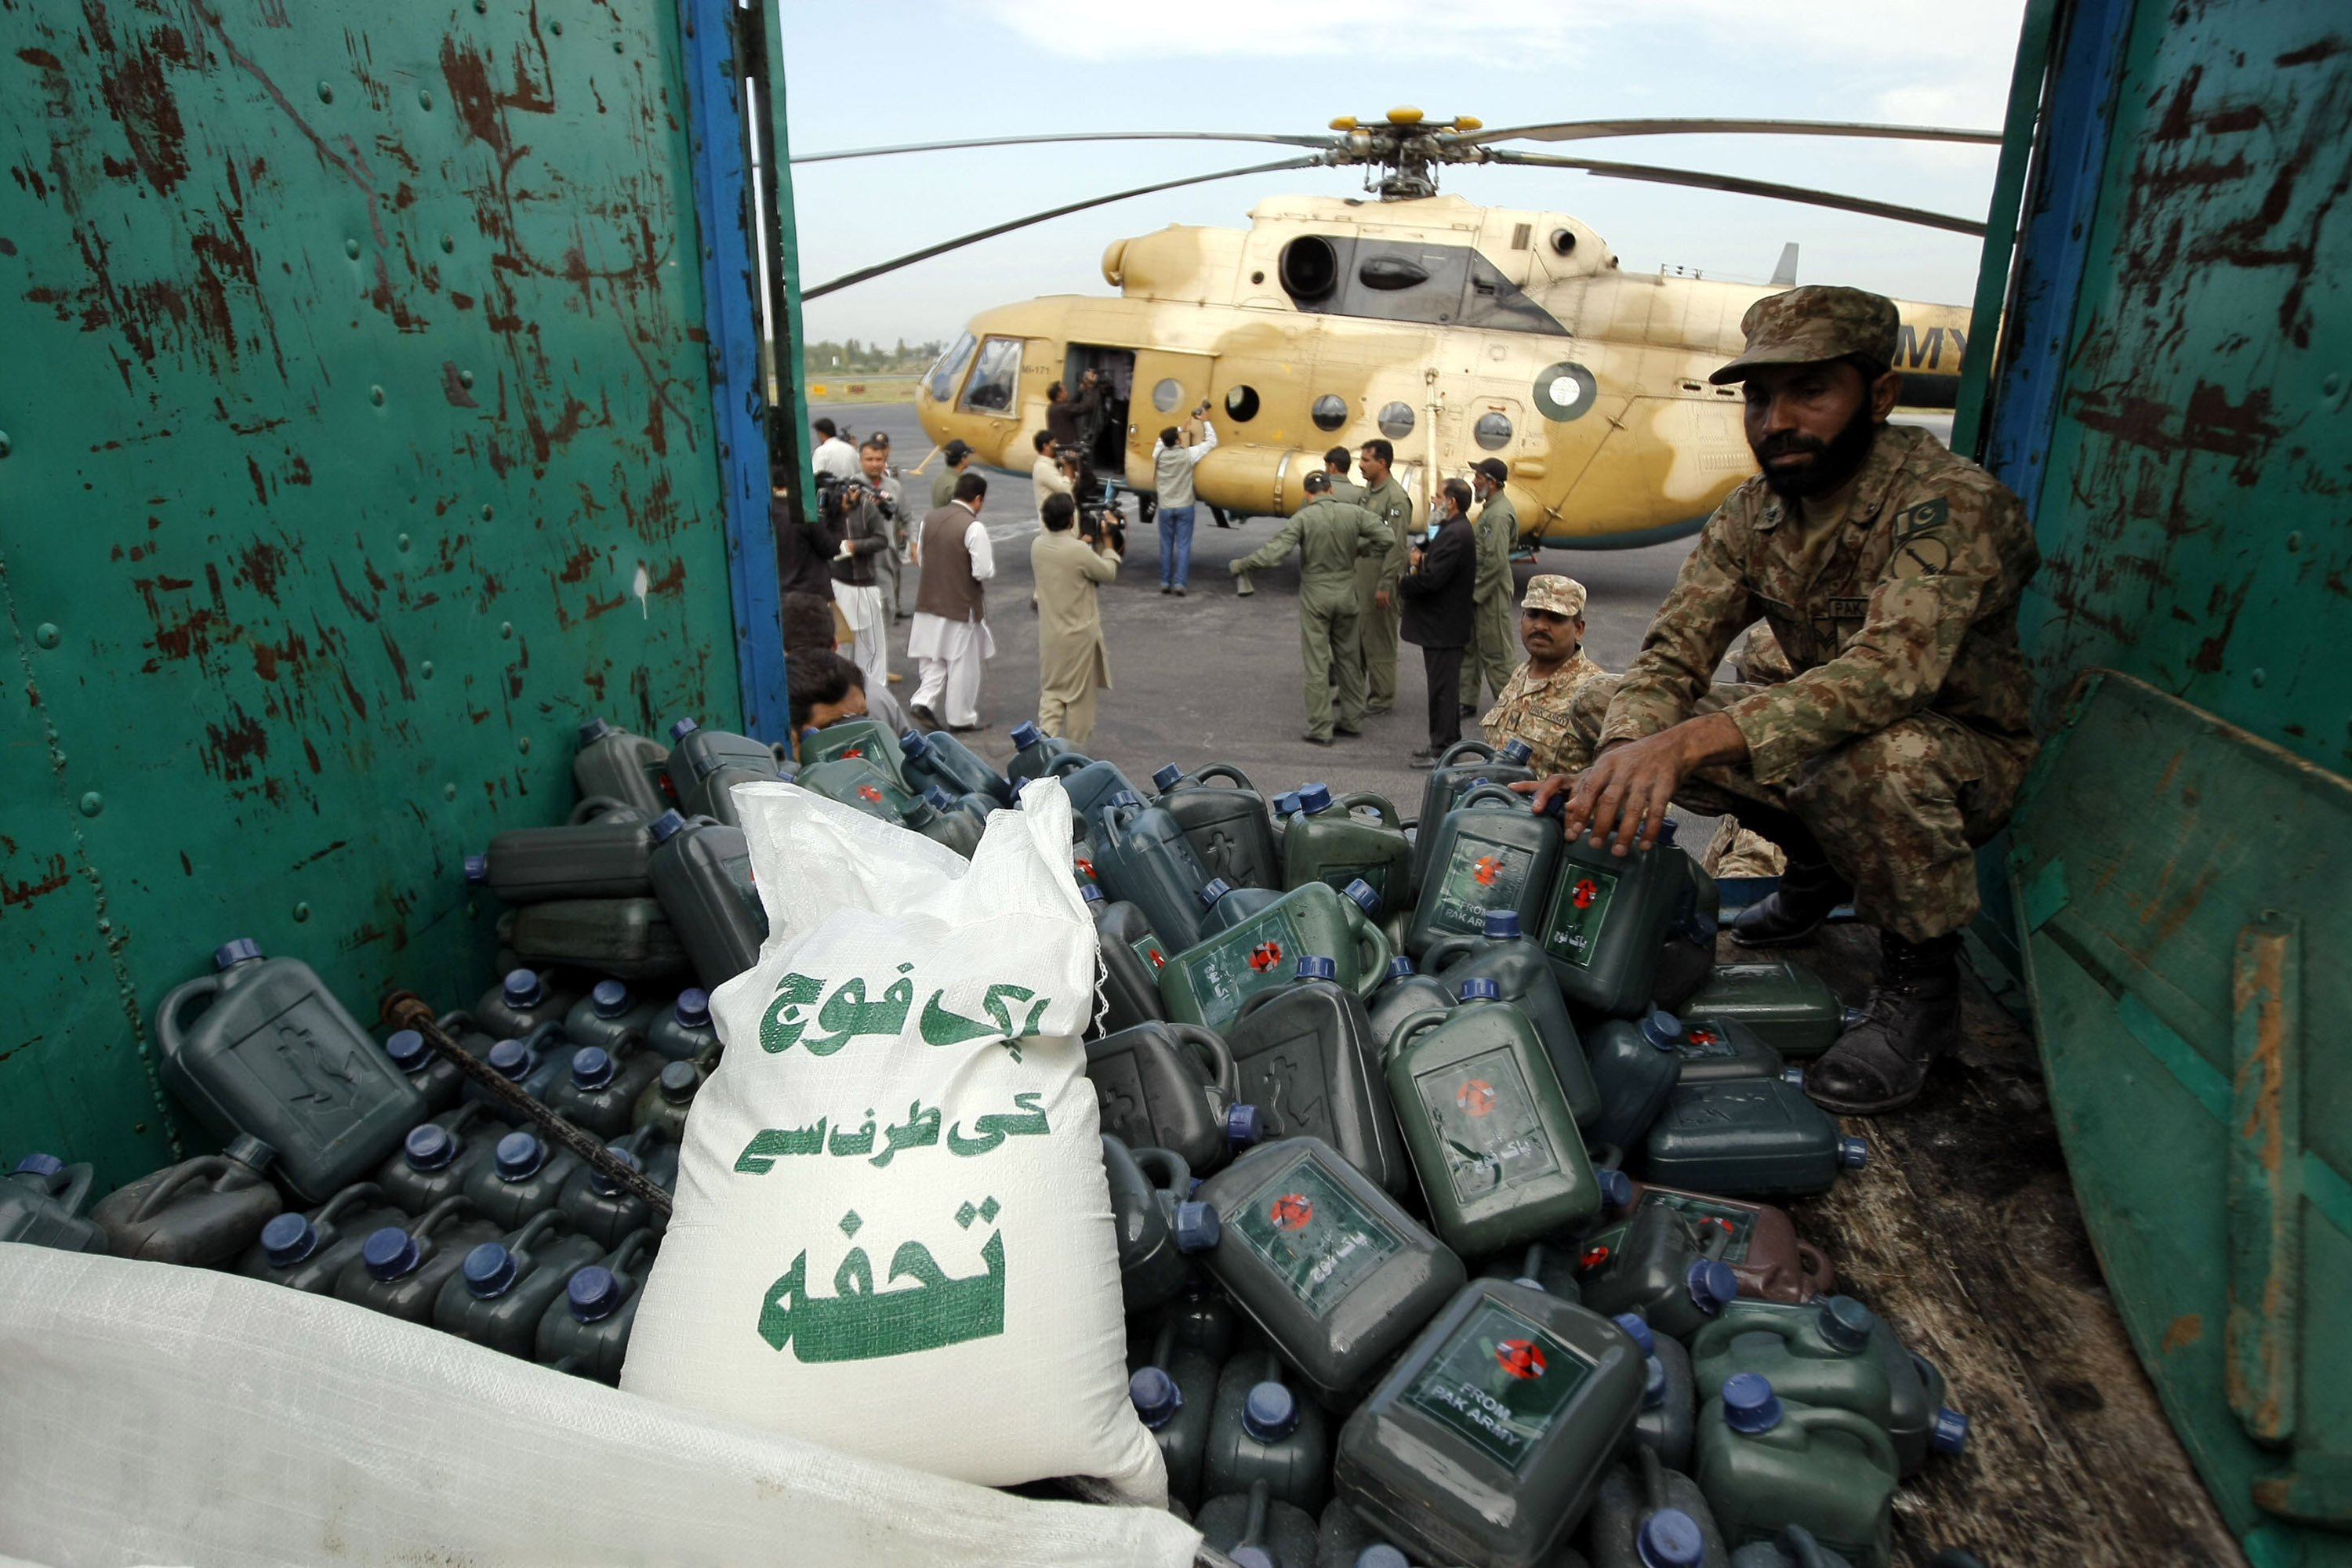 (151028) -- PESHAWAR, Oct. 28, 2015 (Xinhua) -- Pakistani soldiers load goods for earthquake survivors into an army helicopter in northwest Pakistan's Peshawar, Oct. 27, 2015. The Pakistani government, army and charity organizations continued rescue efforts on Tuesday after a powerful 7.5-magnitude earthquake killed 350 people in the country and neighboring Afghanistan on Monday. (Xinhua/Umar Qayyum)